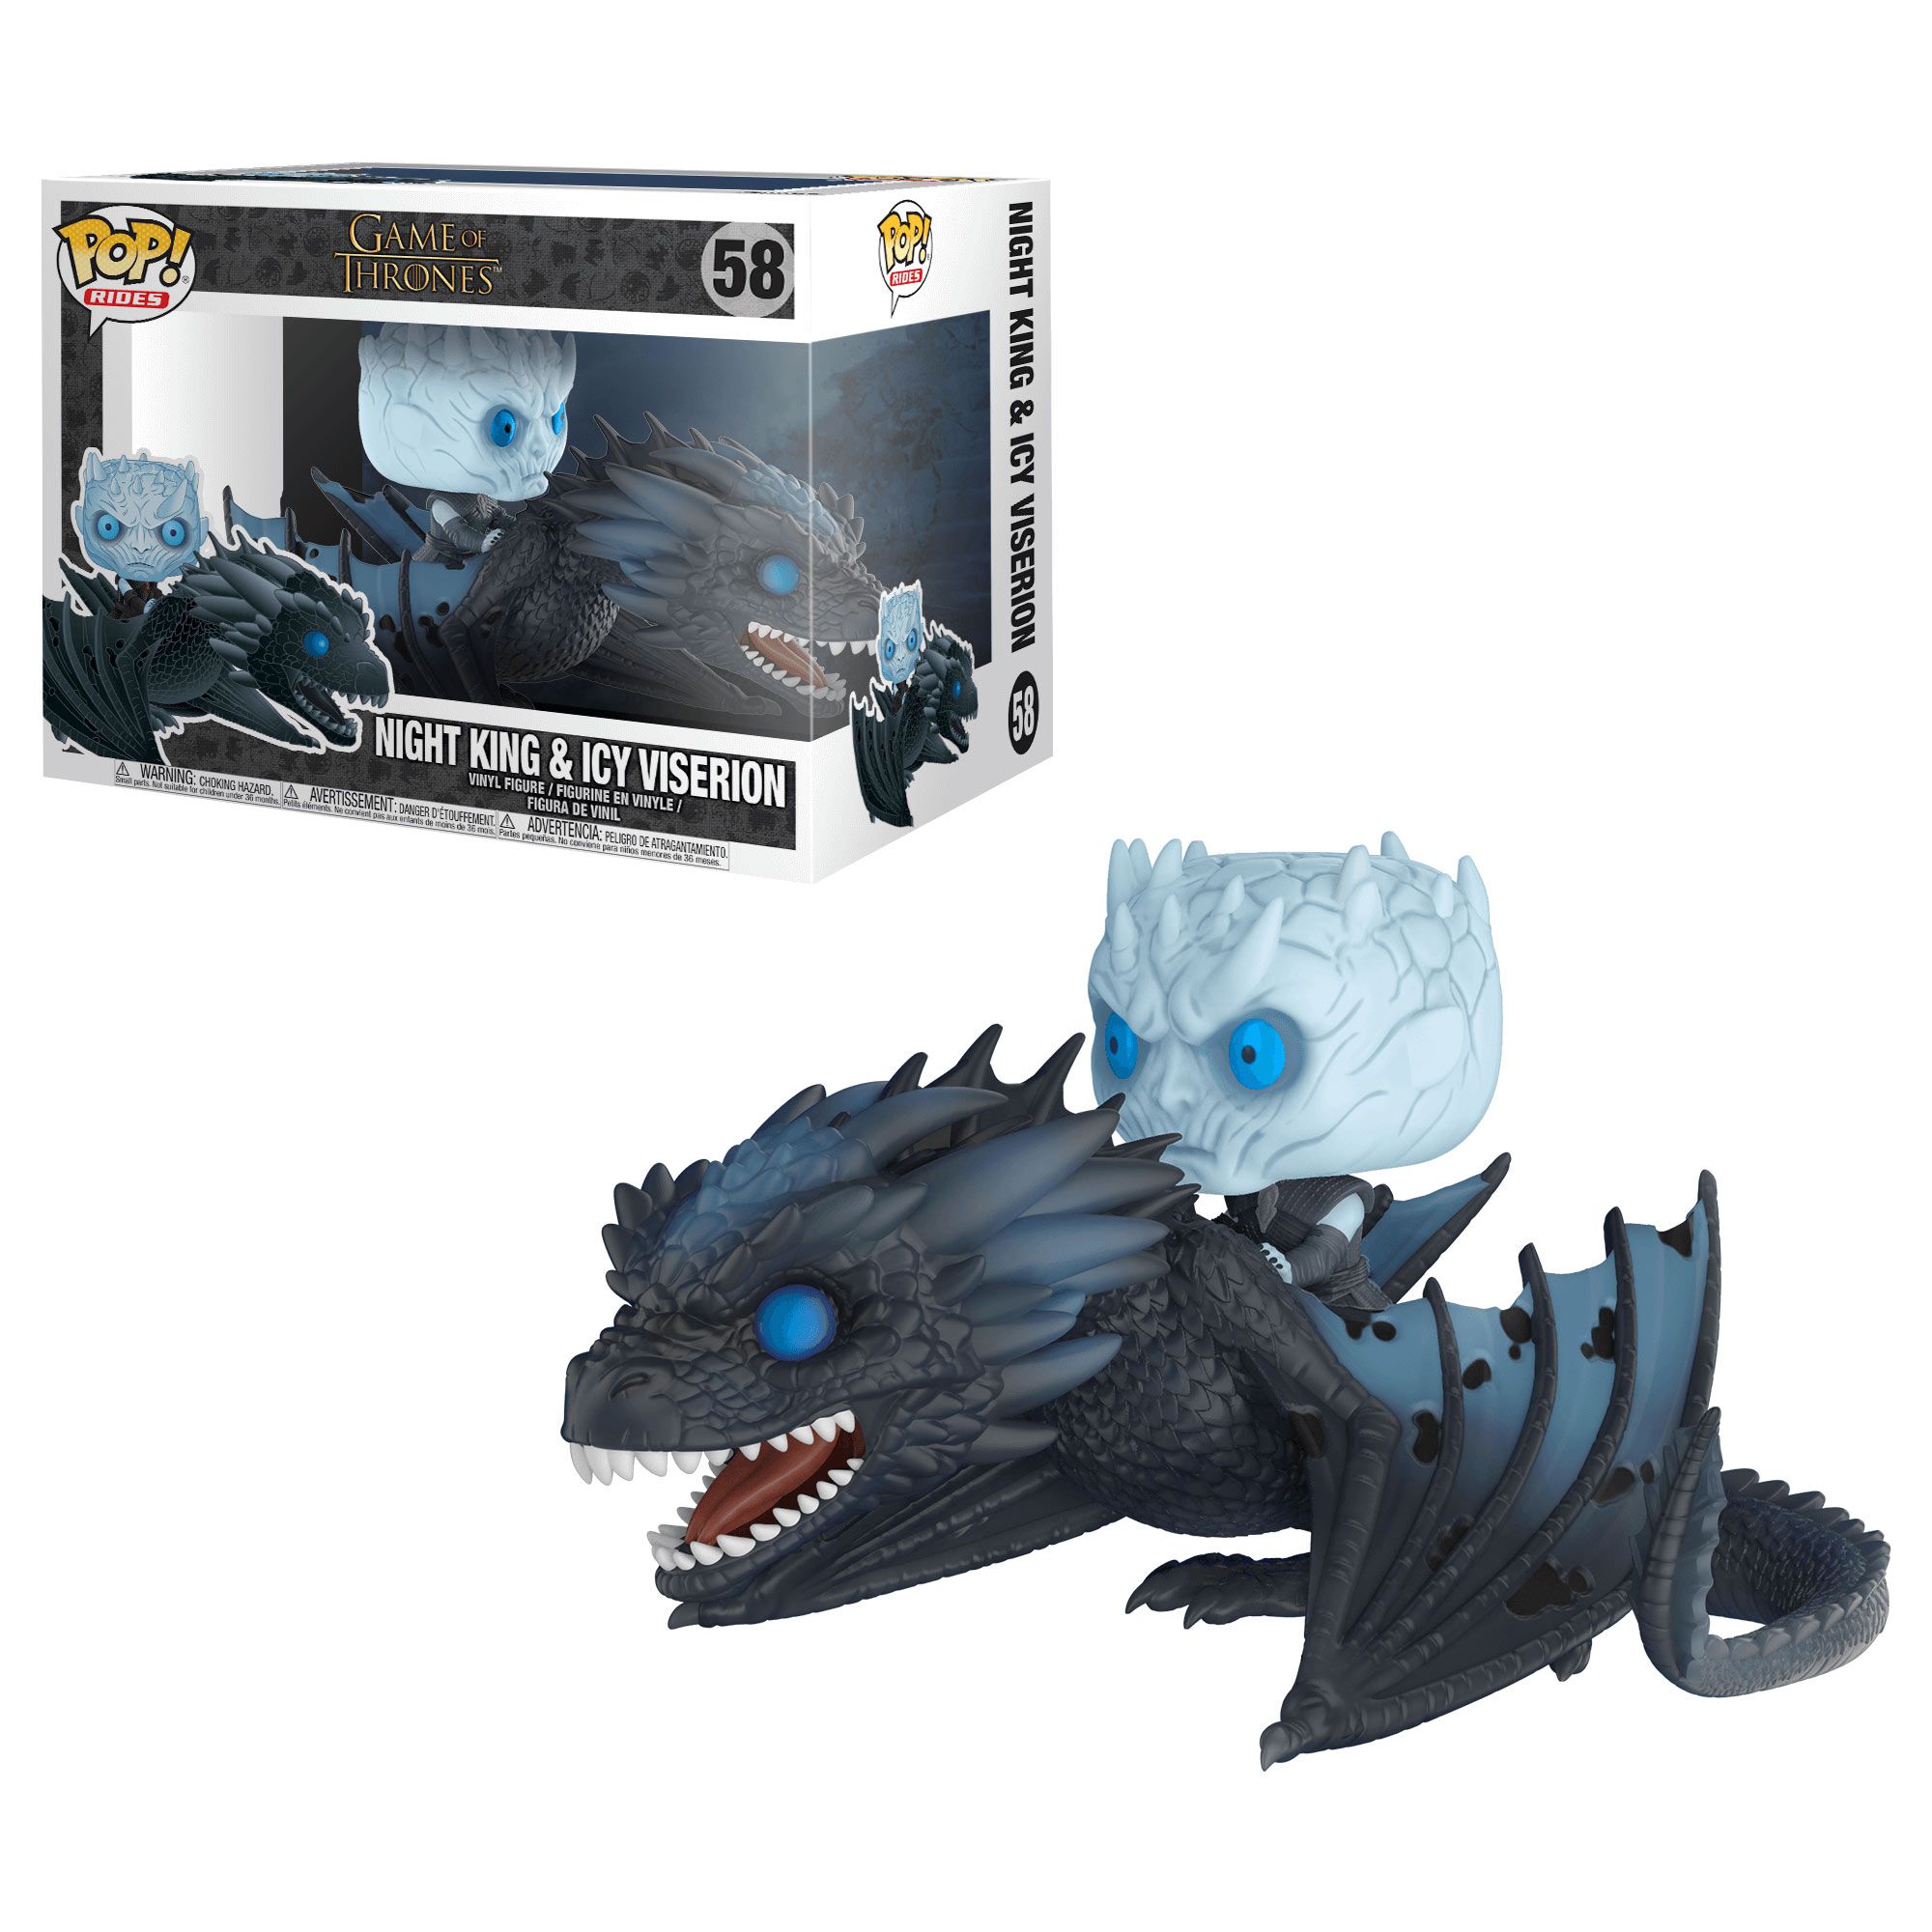 Night King & Icy Viserion #58 - Game of Thrones - Funko Pop! Rides